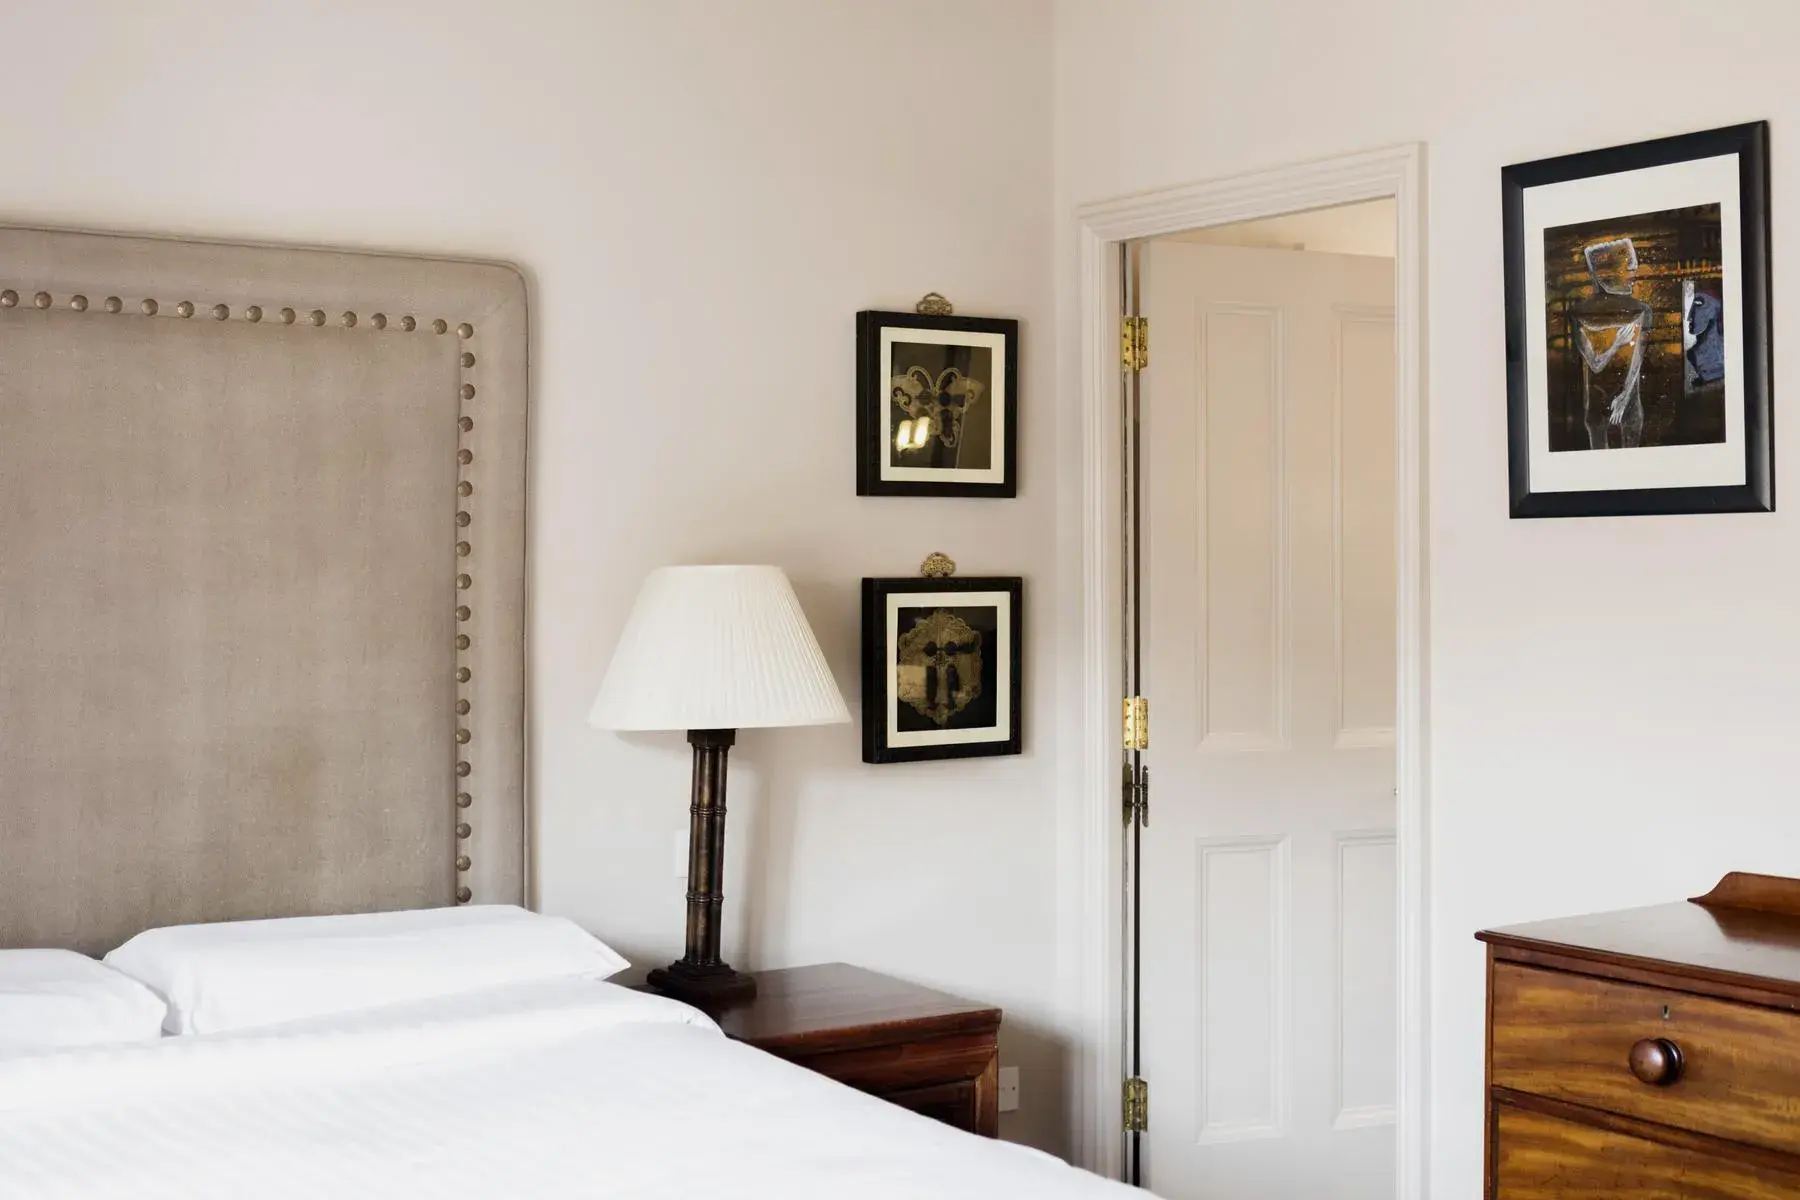 South Molton Street, holiday home in Mayfair, London